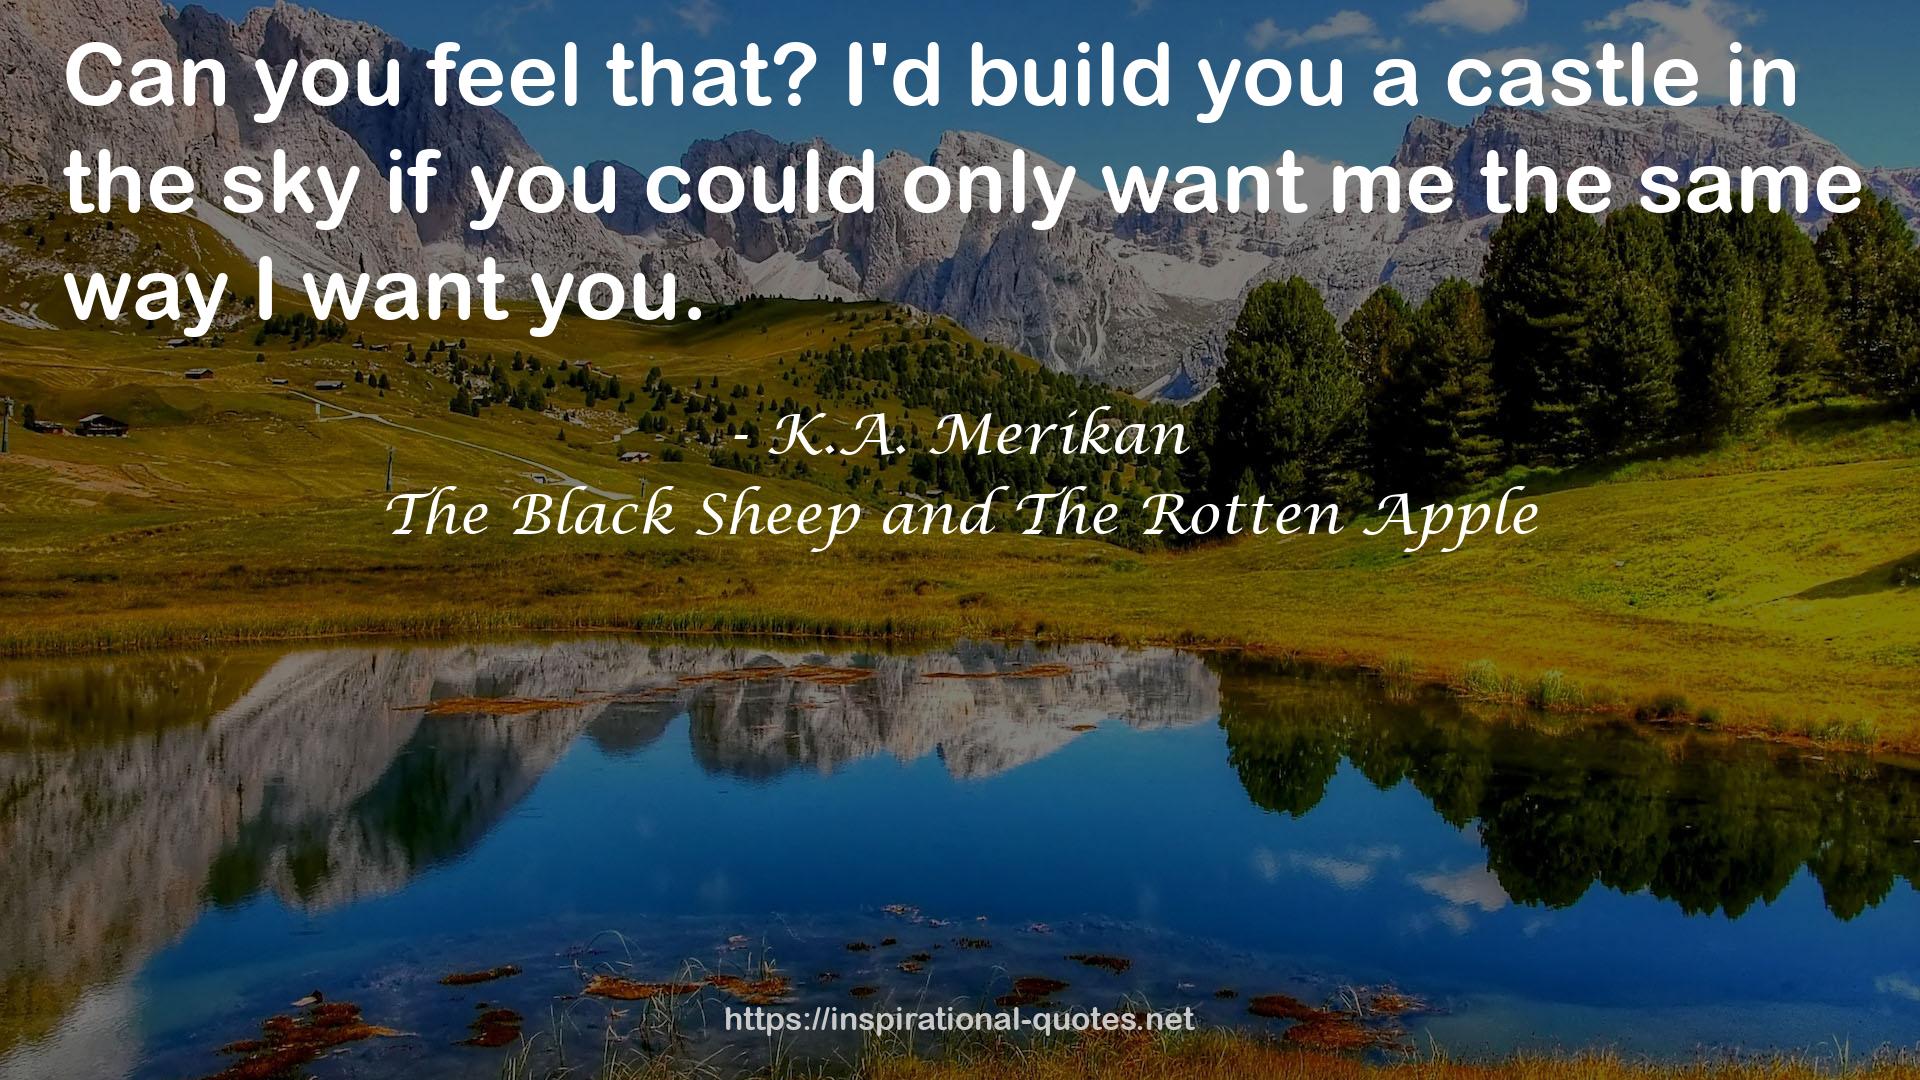 The Black Sheep and The Rotten Apple QUOTES